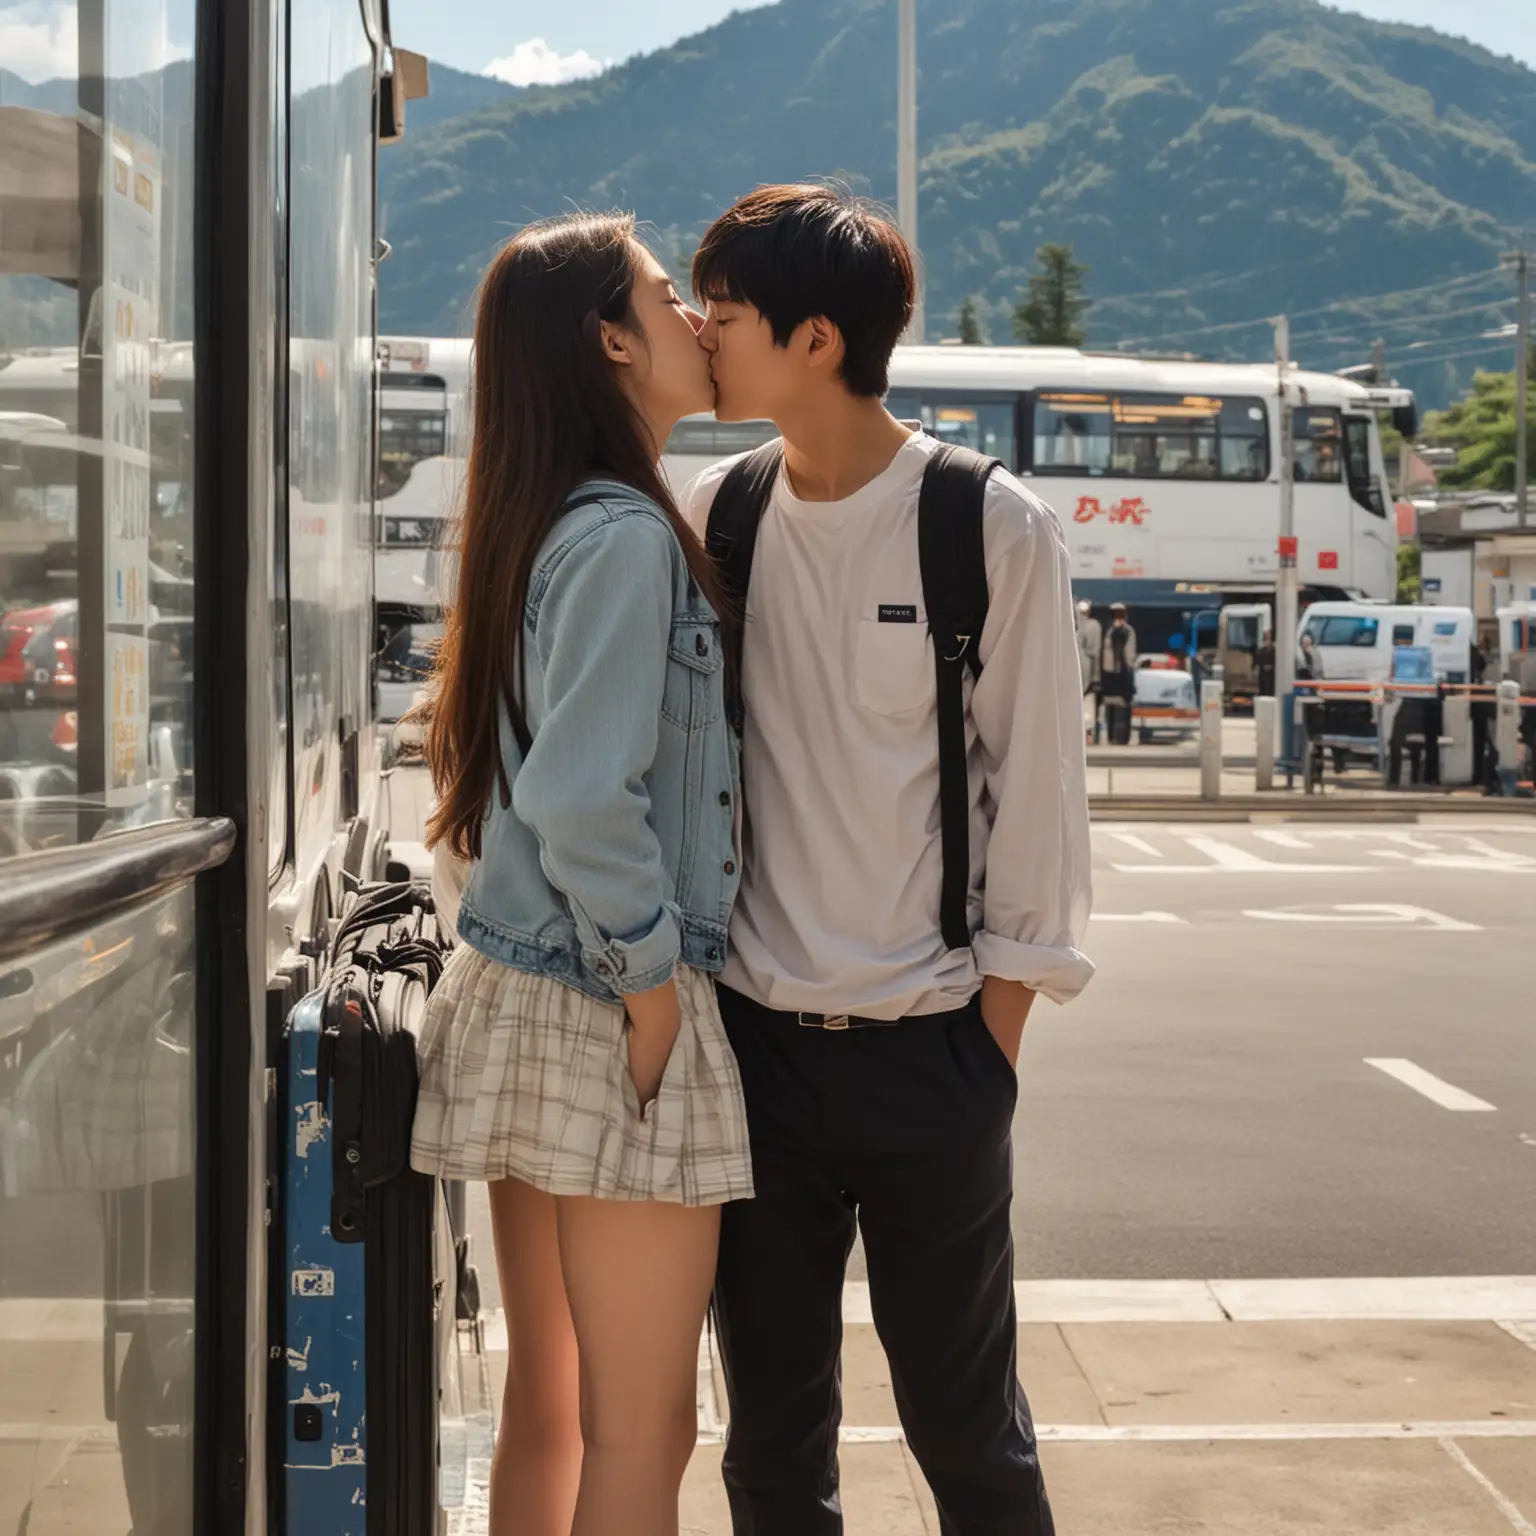 16 year old Japanse girl and boy kissing in the bus station with mountain view